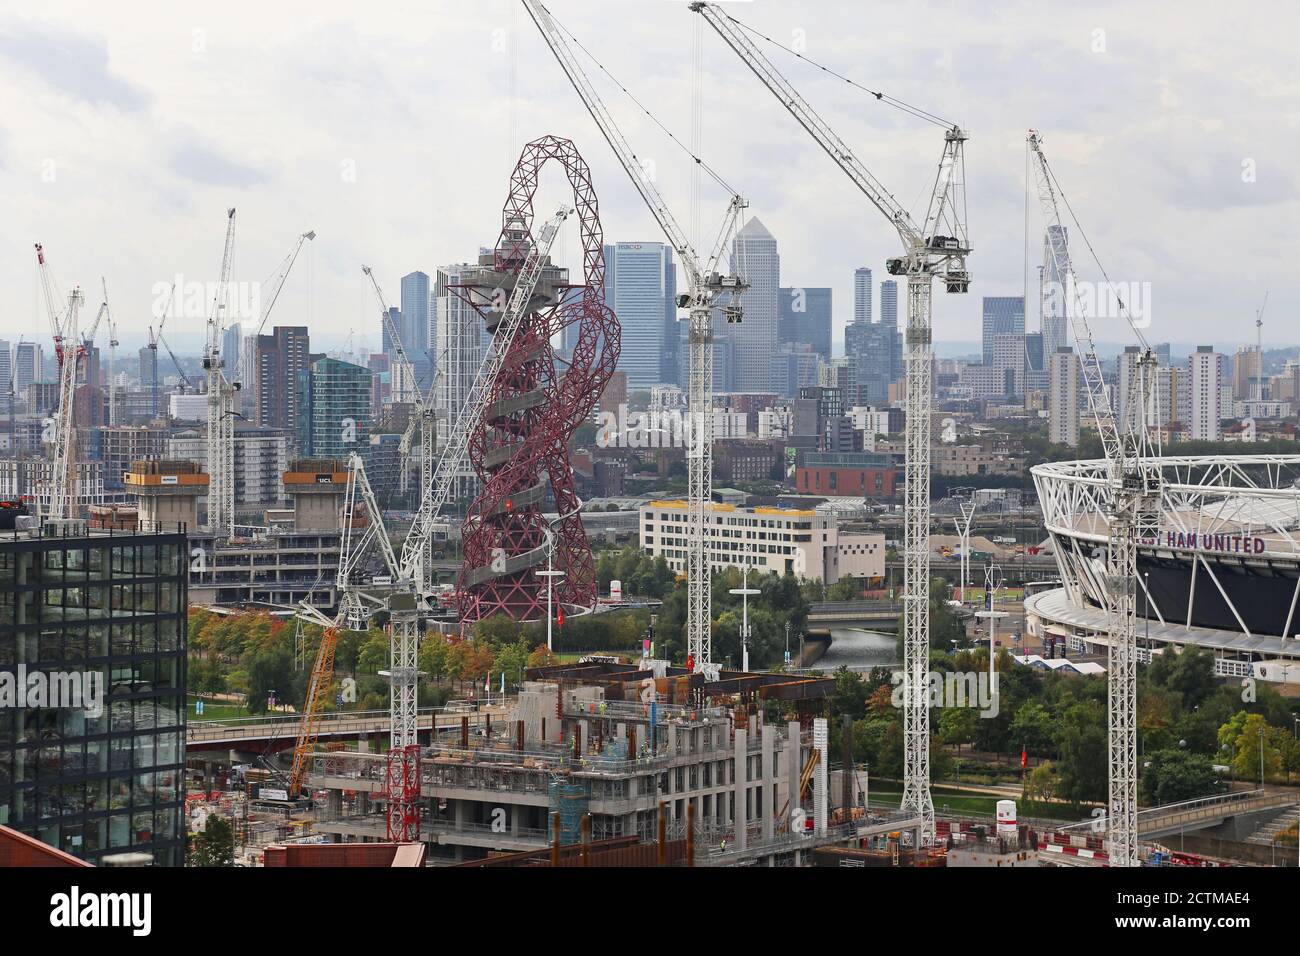 The Arcelor Mittal Orbit tower surrounded by cranes as the Stratford Olympic Village area is developed with new apartment blocks. Canary Wharf beyond. Stock Photo